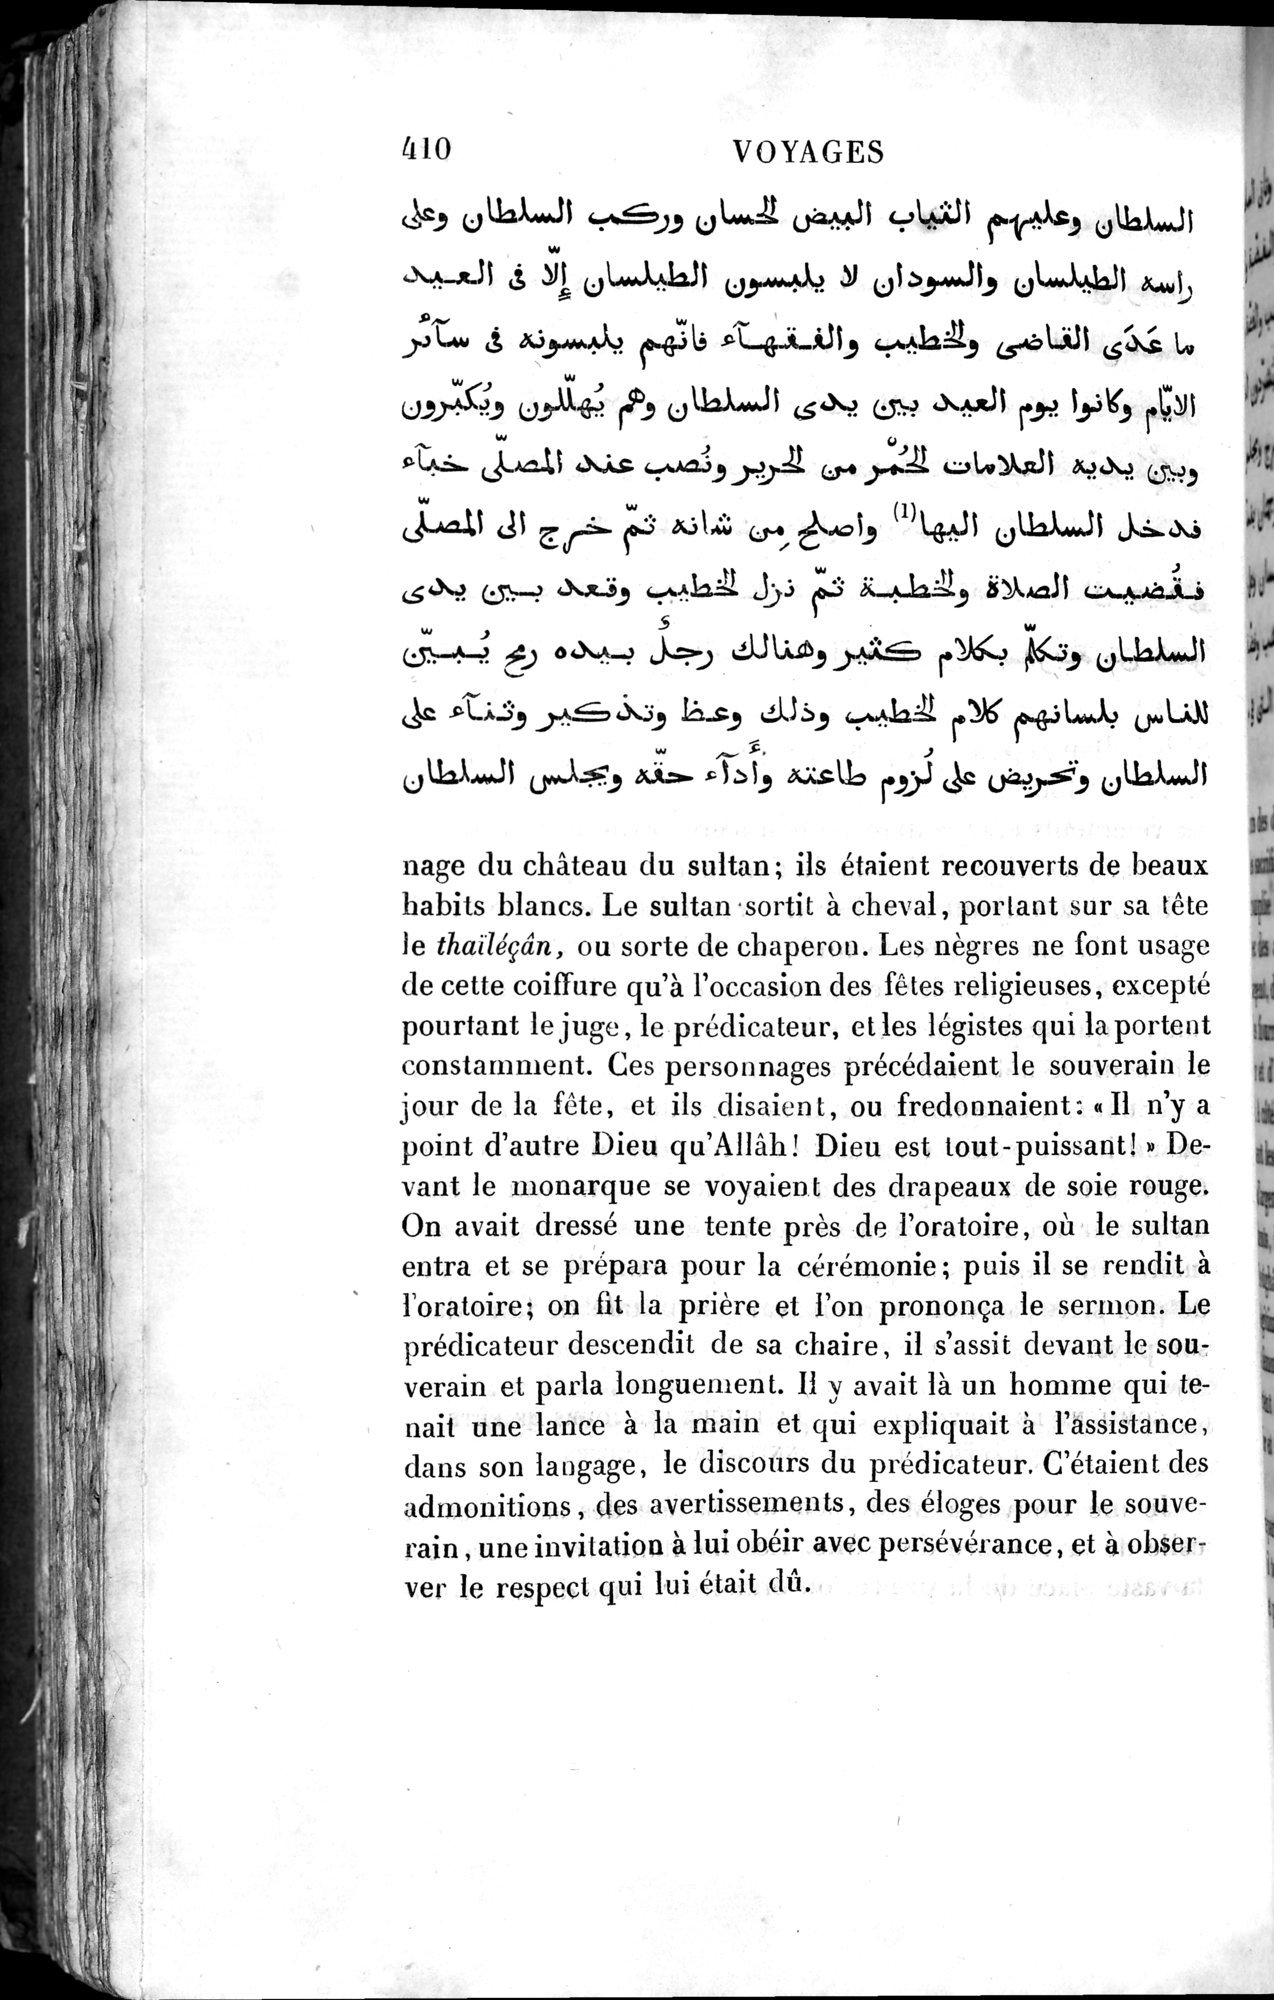 Voyages d'Ibn Batoutah : vol.4 / Page 422 (Grayscale High Resolution Image)